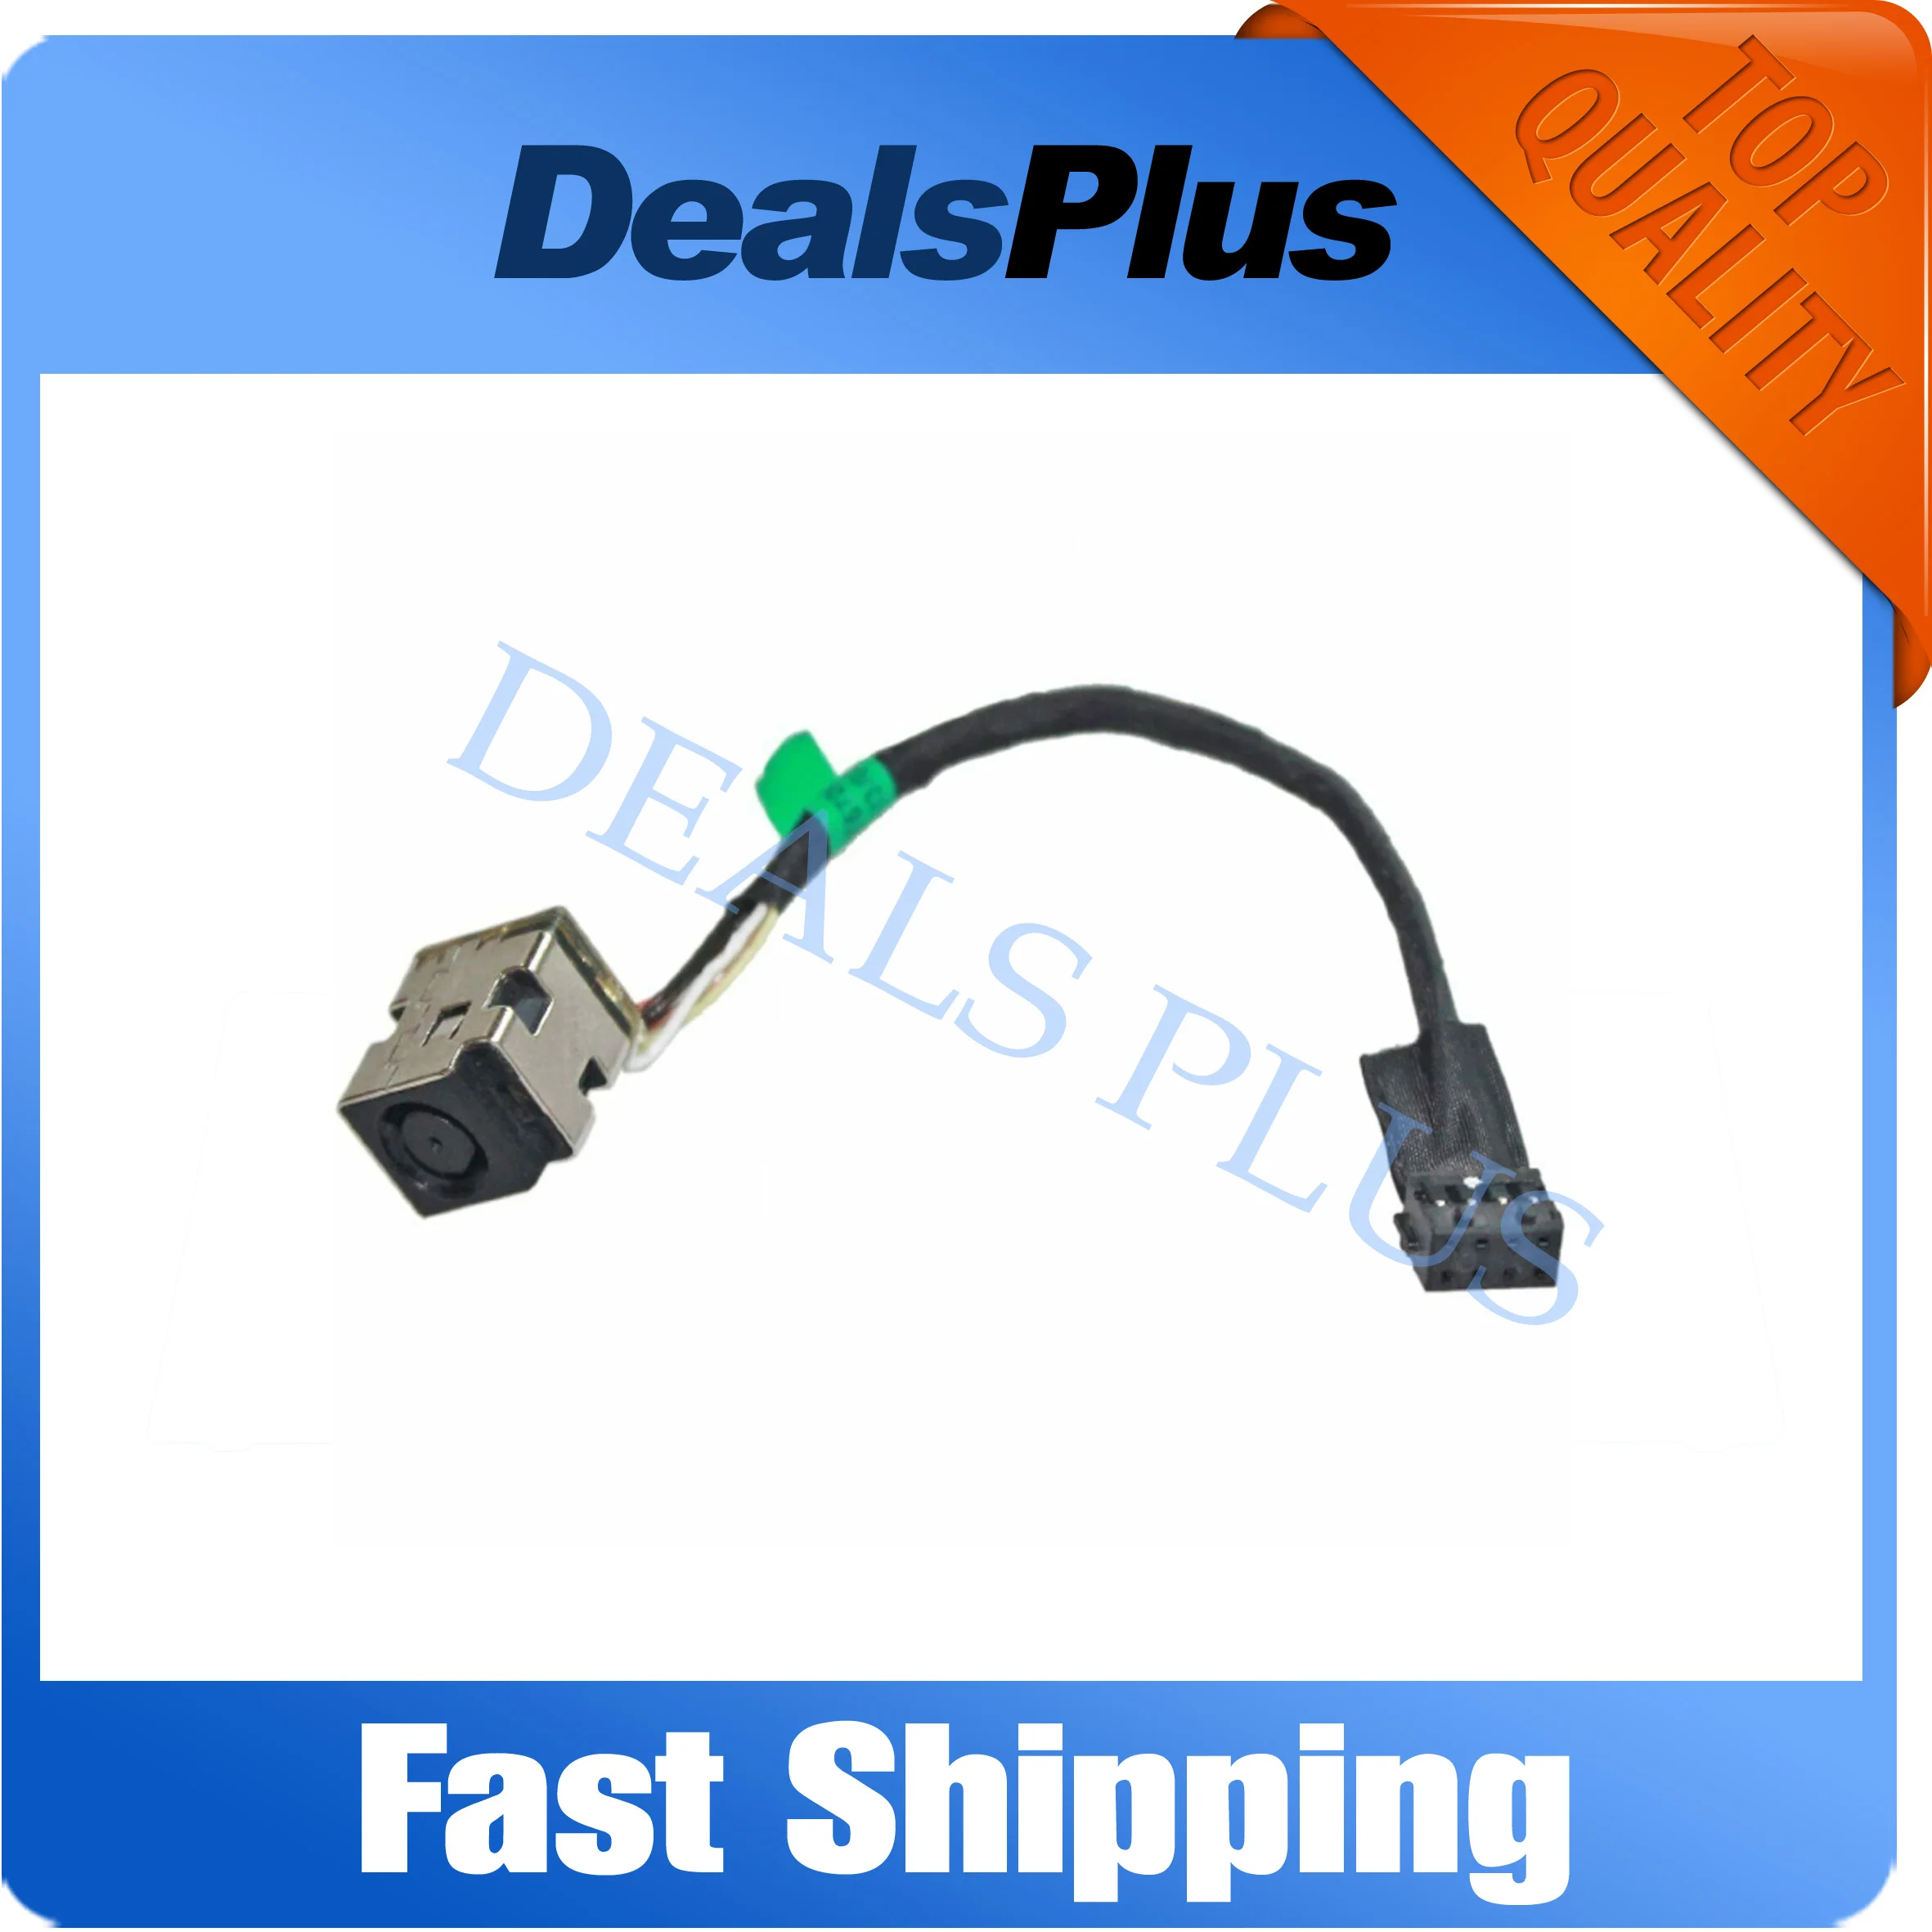 

New Replacement DC Power Jack Cable Socket For HP ProBook 4440S 4545S 4540S 676706-YD1 676706-SD1 676706-FD1